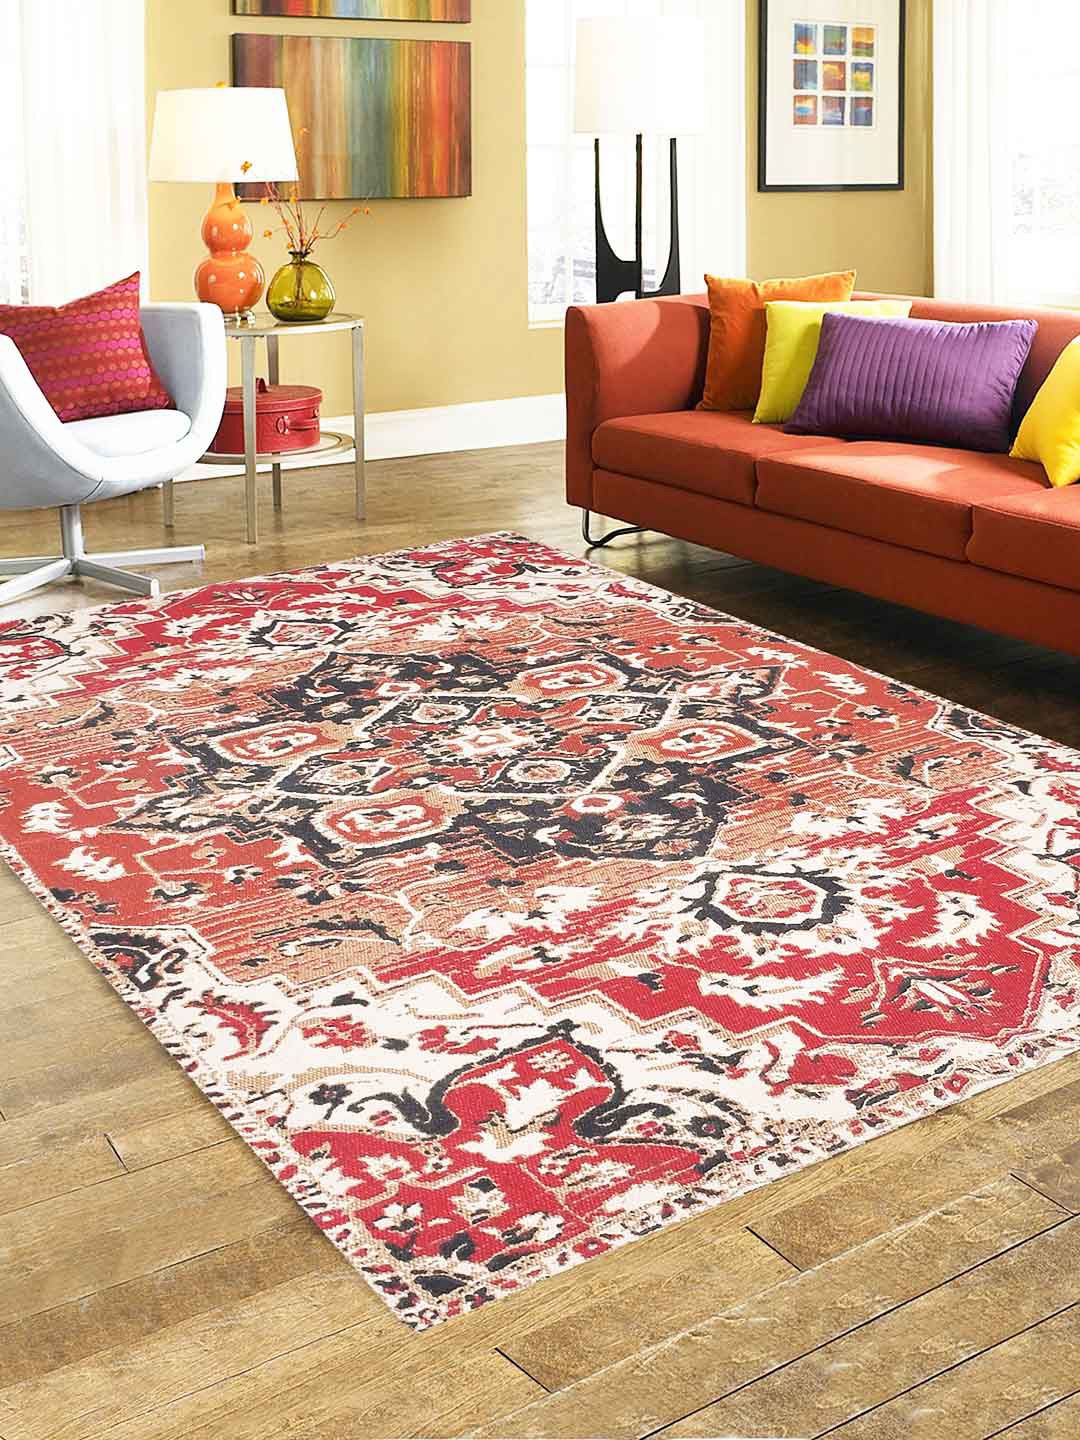 BLANC9 Black & Red Ethnic Motifs Patterned 800 GSM Cotton Carpets Price in India